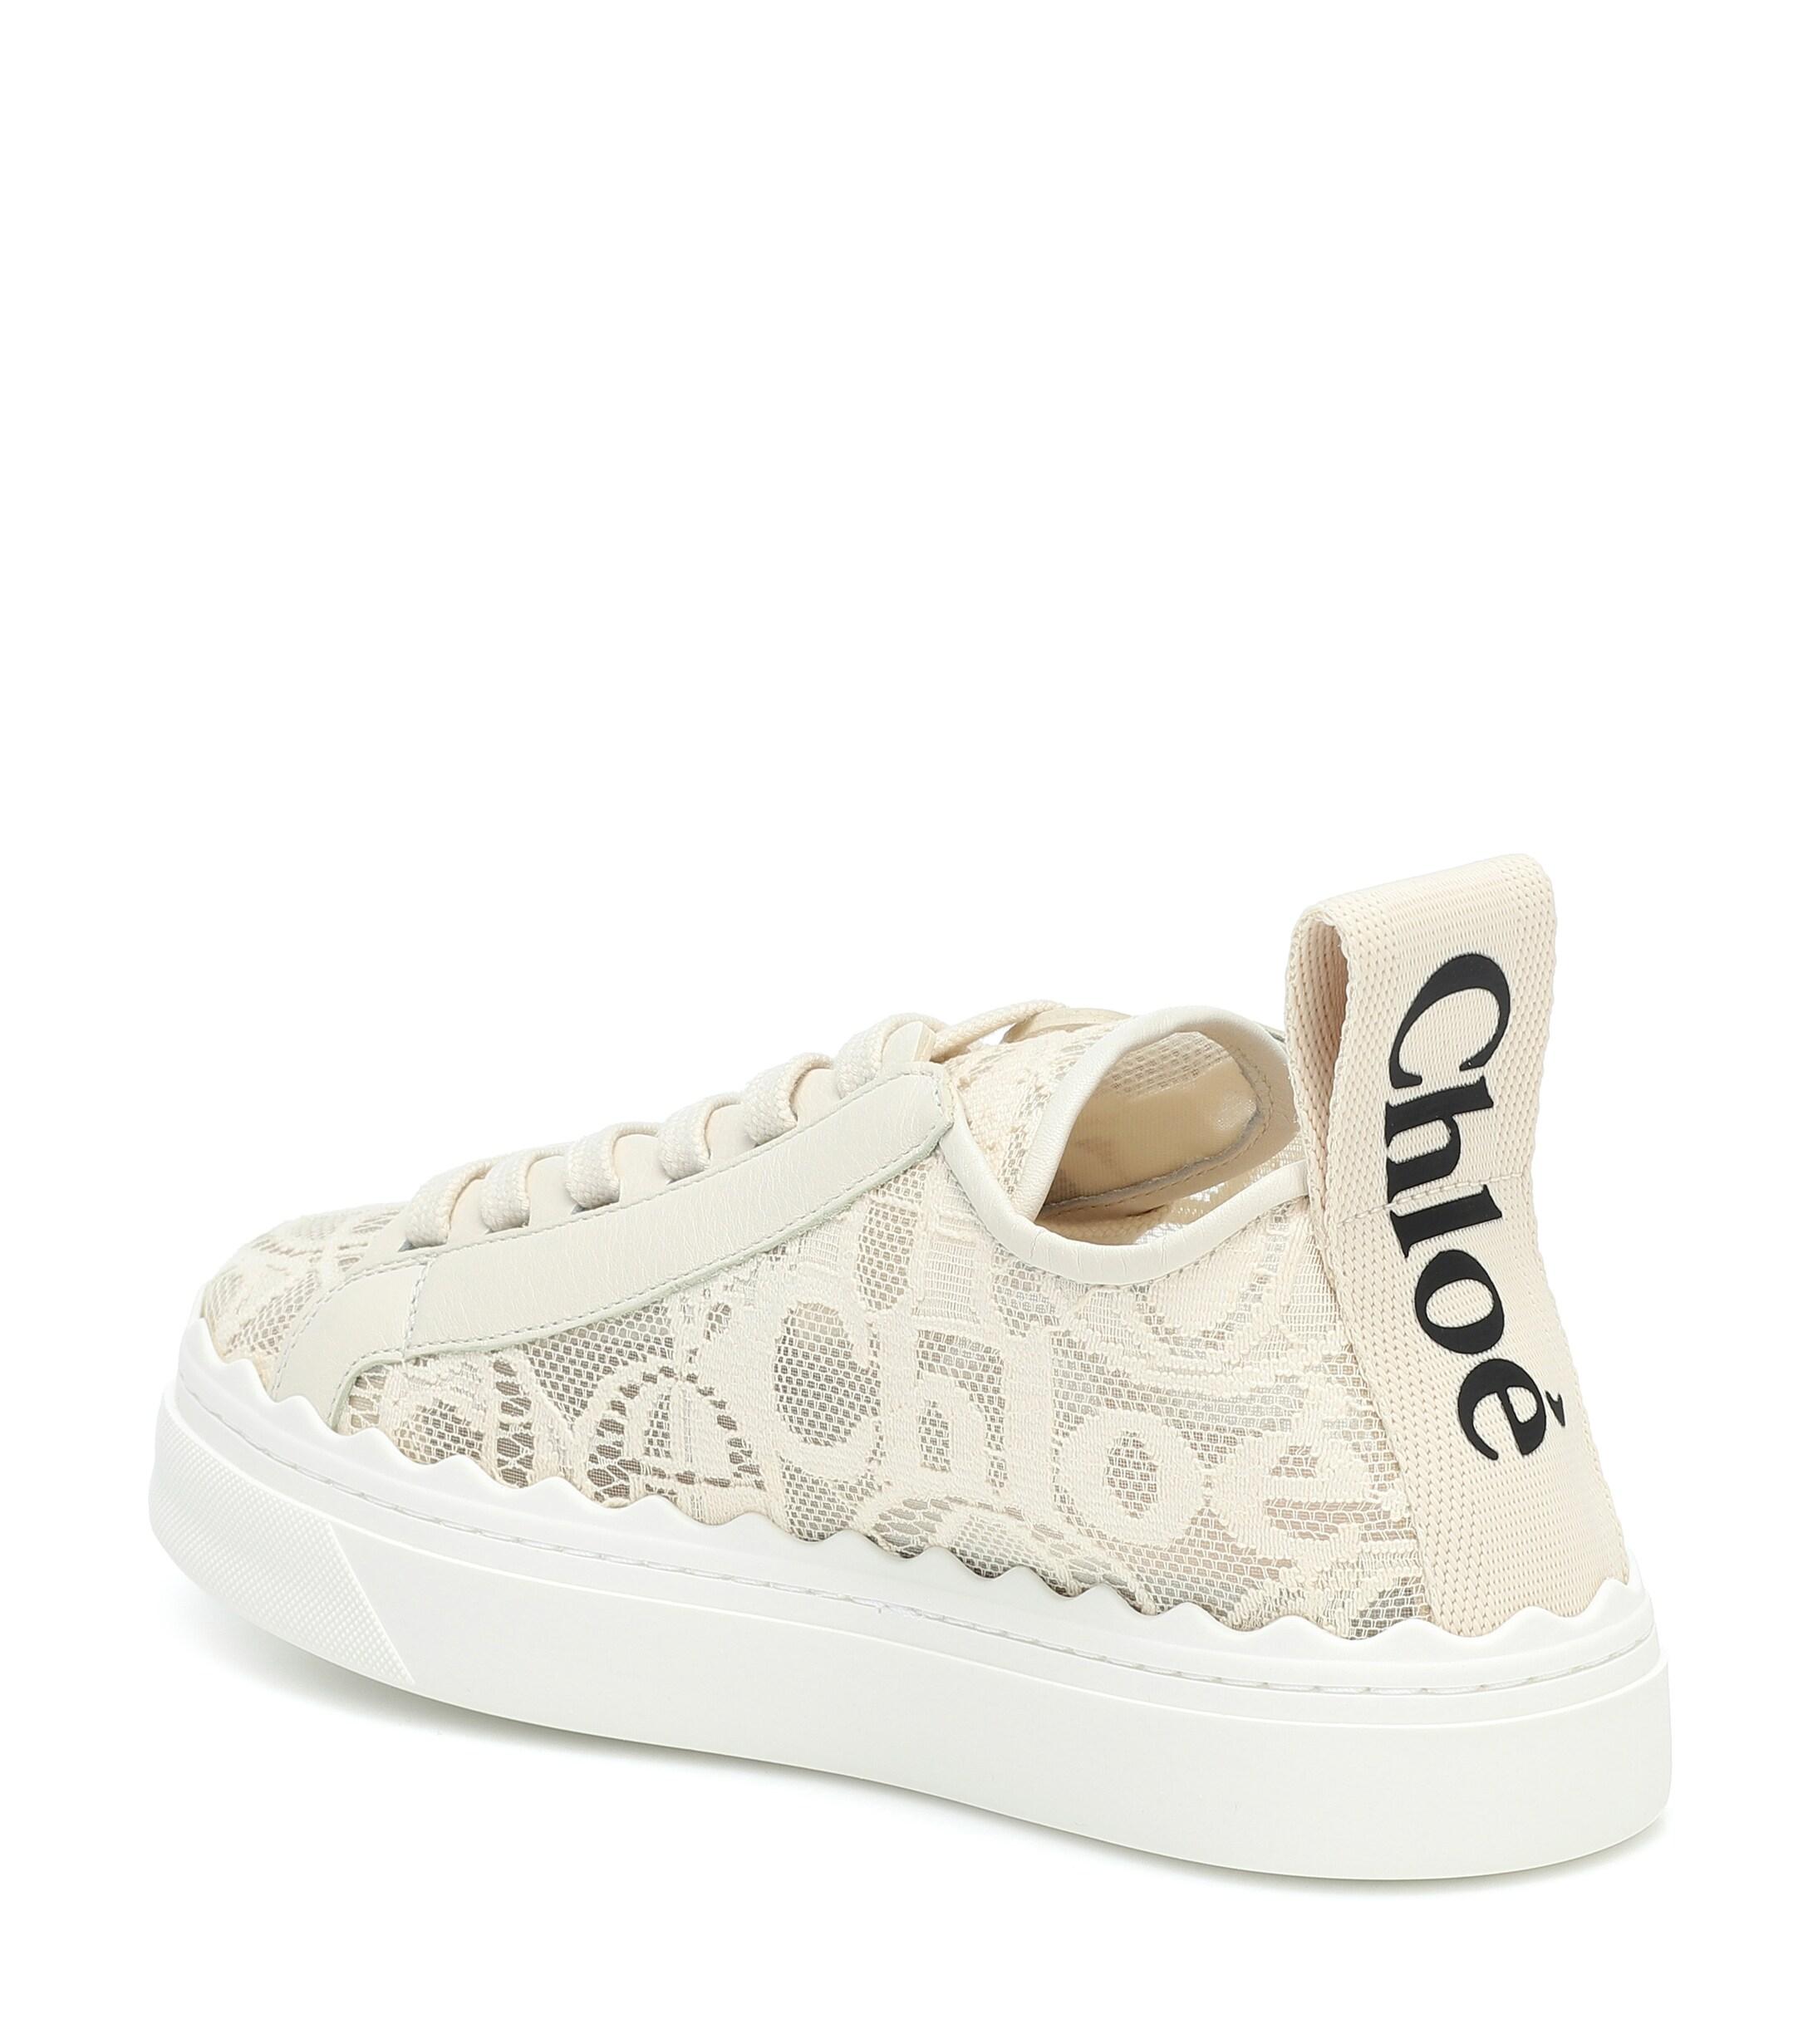 Chloé Lauren Lace Sneakers in Beige (Natural) - Save 62% - Lyst